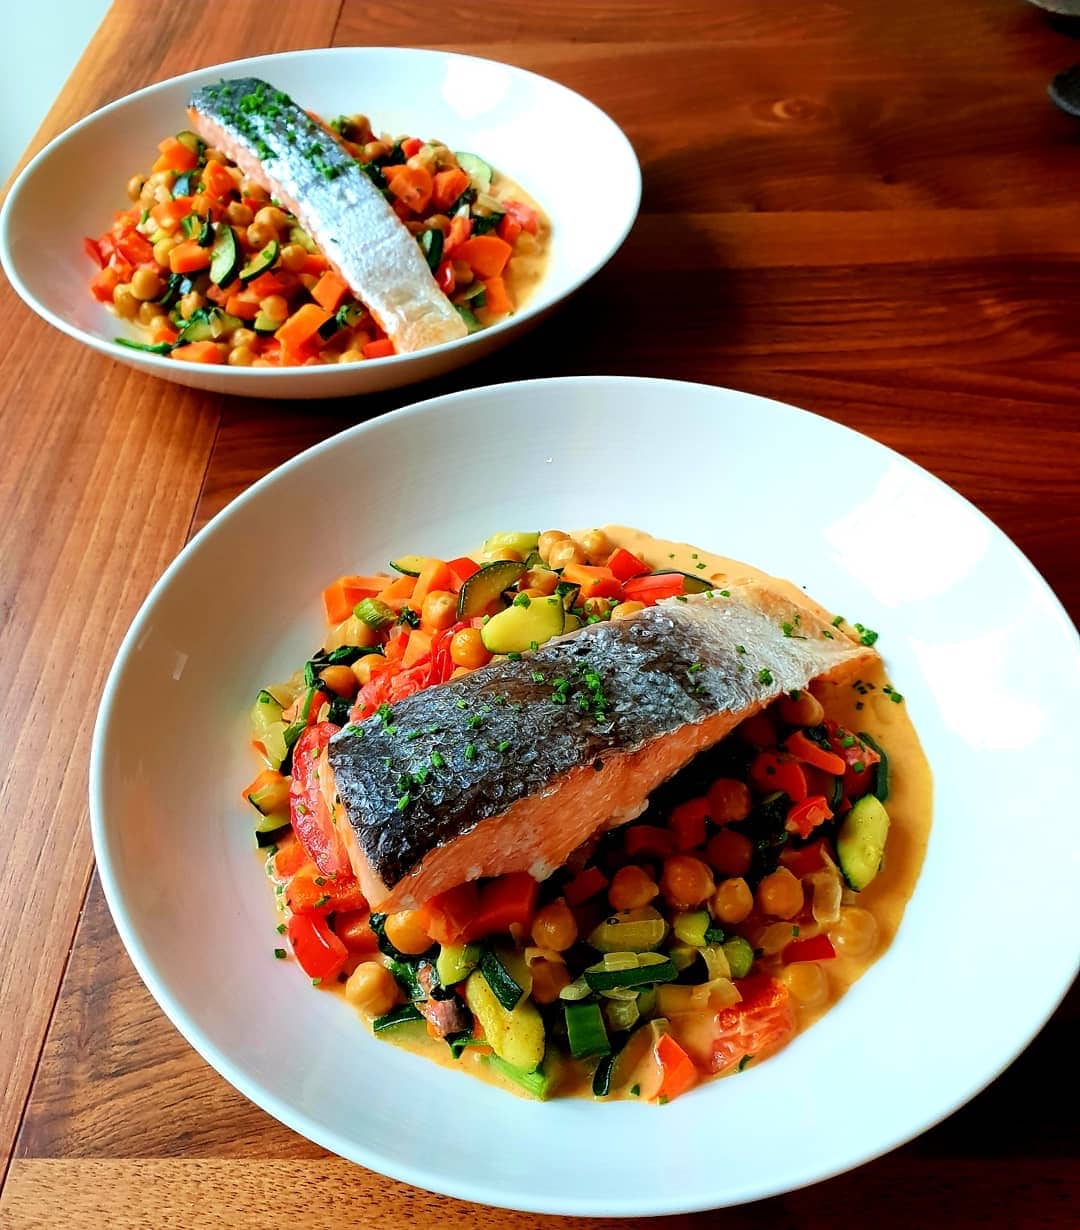 Roasted Lemon Salmon on a Bed of Spiced Chickpeas and Vegetables